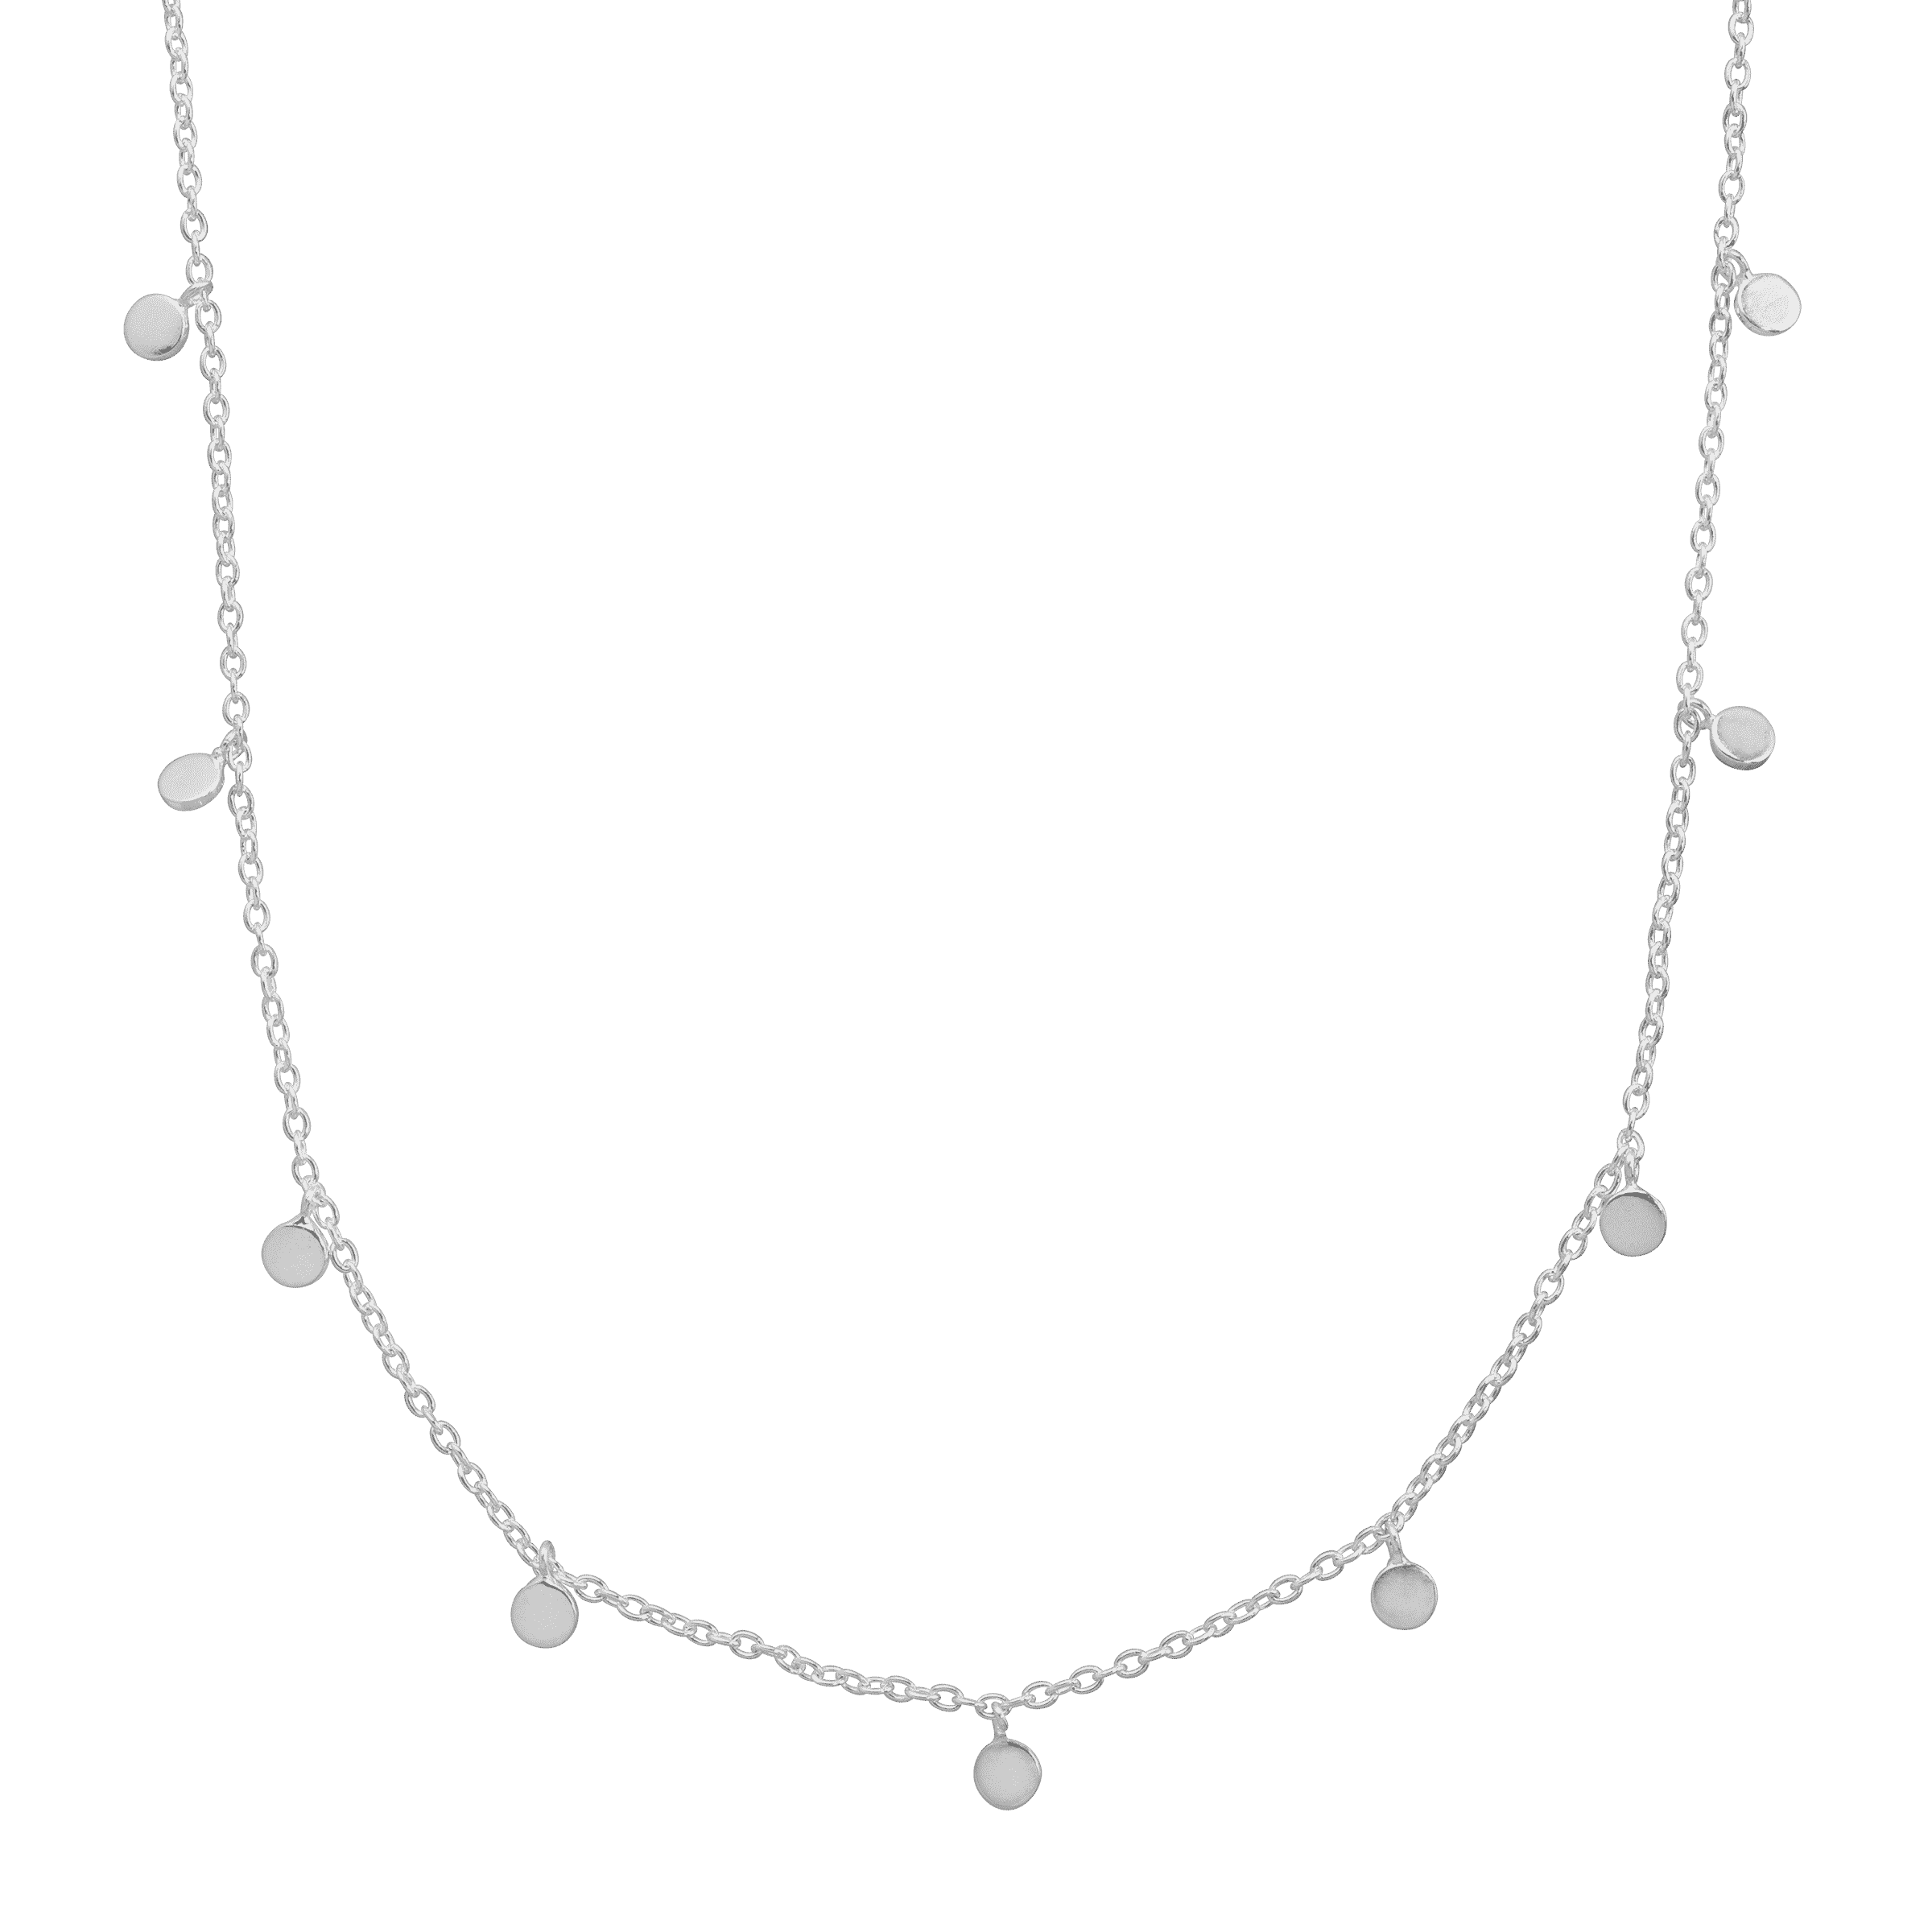 Silver Lace Necklace